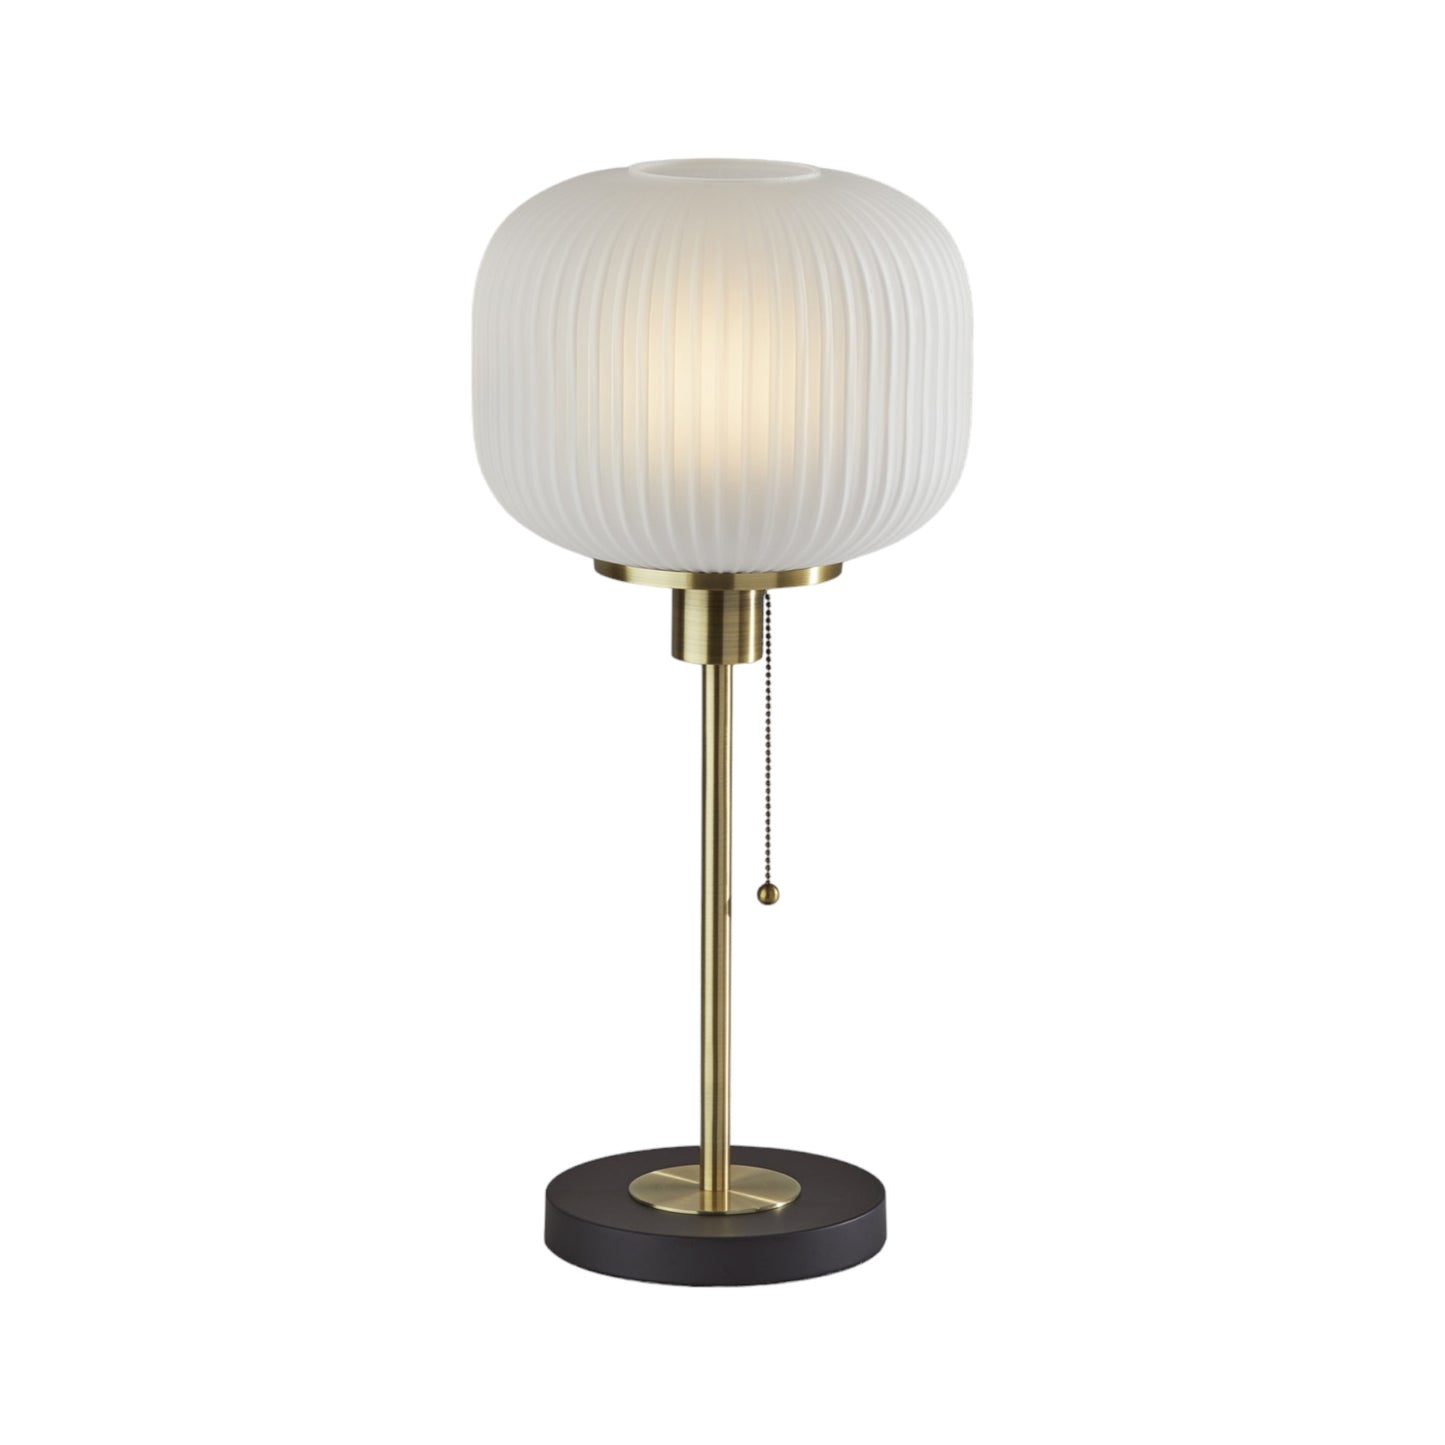 22" Antiqued Brass Table Lamp With White Ribbed Frosted Glass Dome Shade